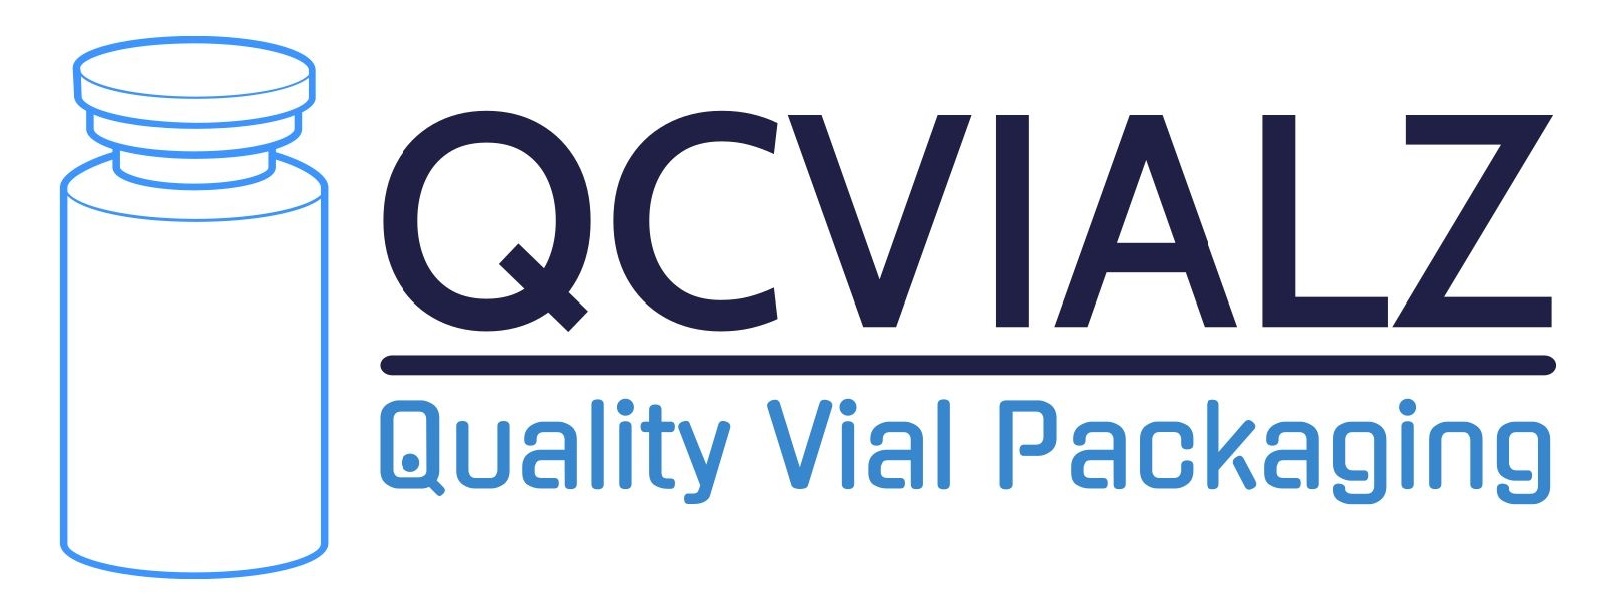 About Us - QCVIALZ Quality Vial Packaging